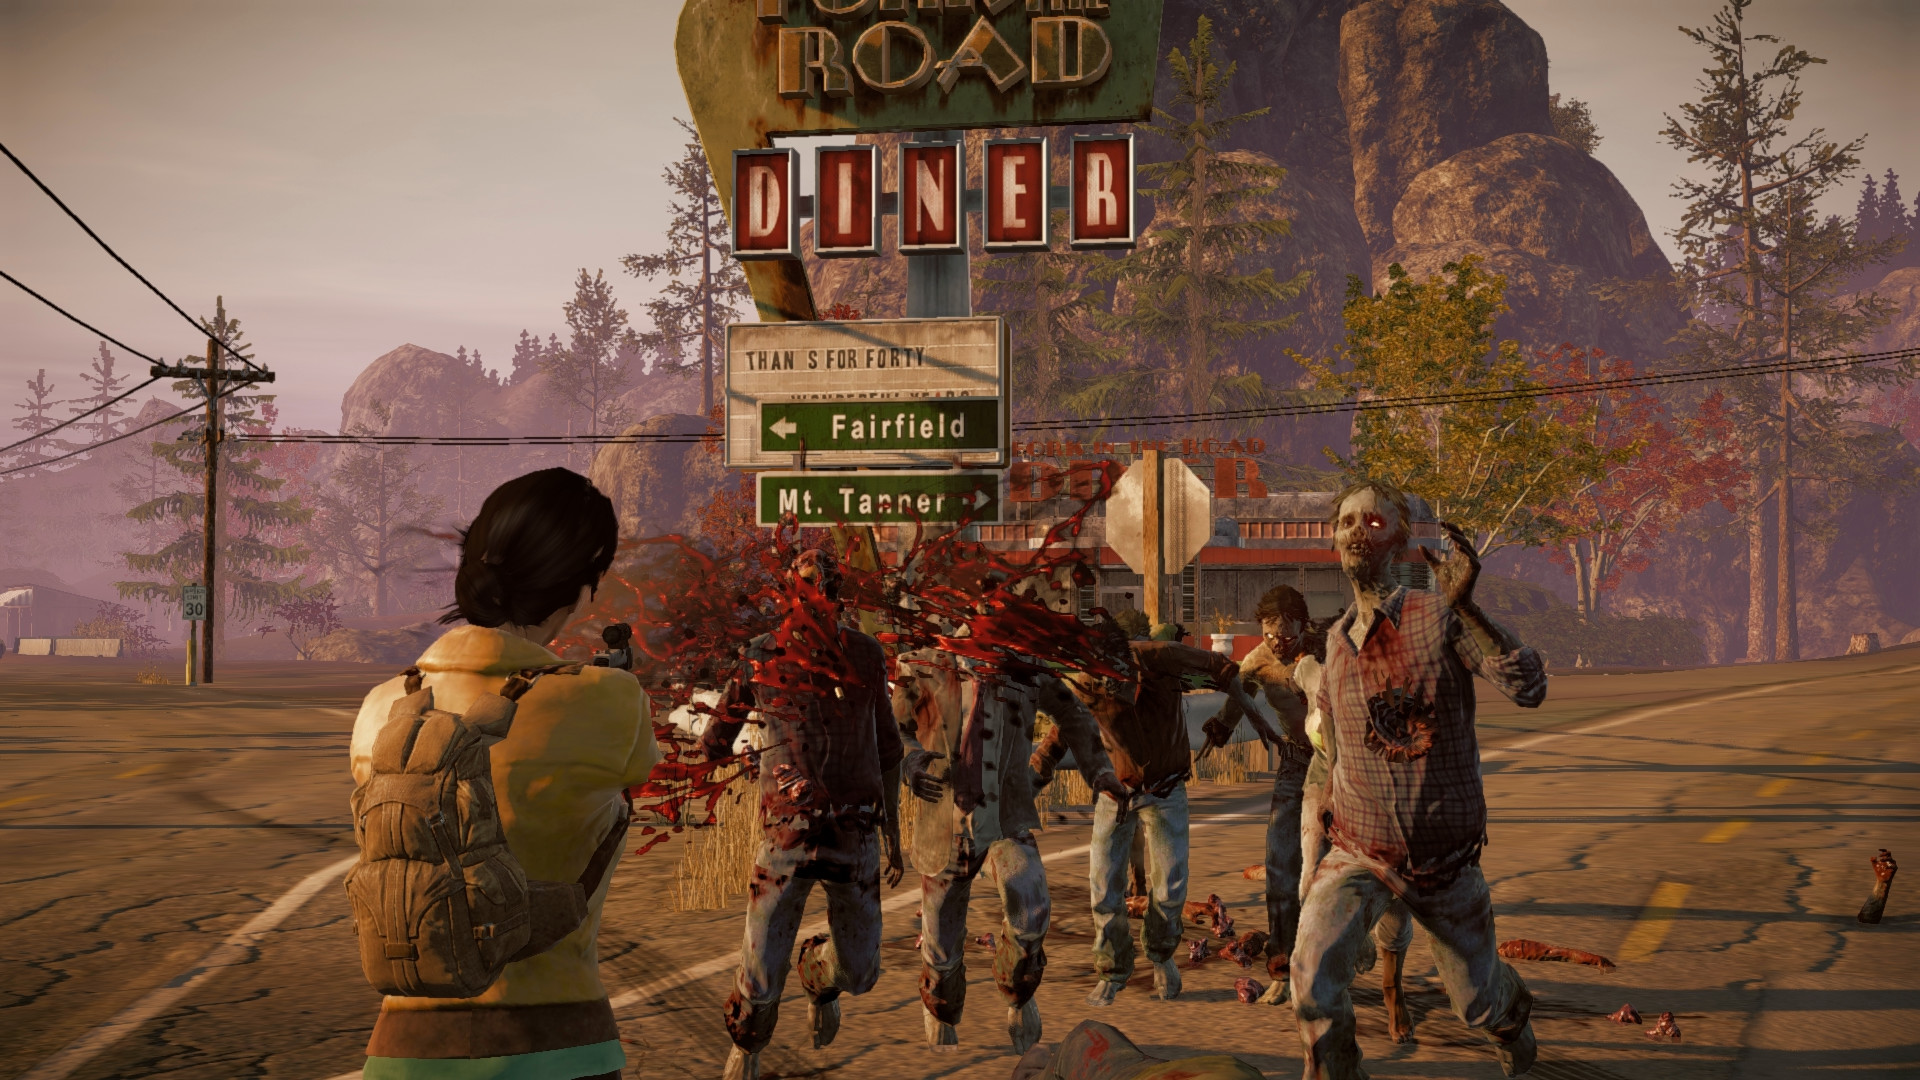 State of Decay 1 free full pc game for Download